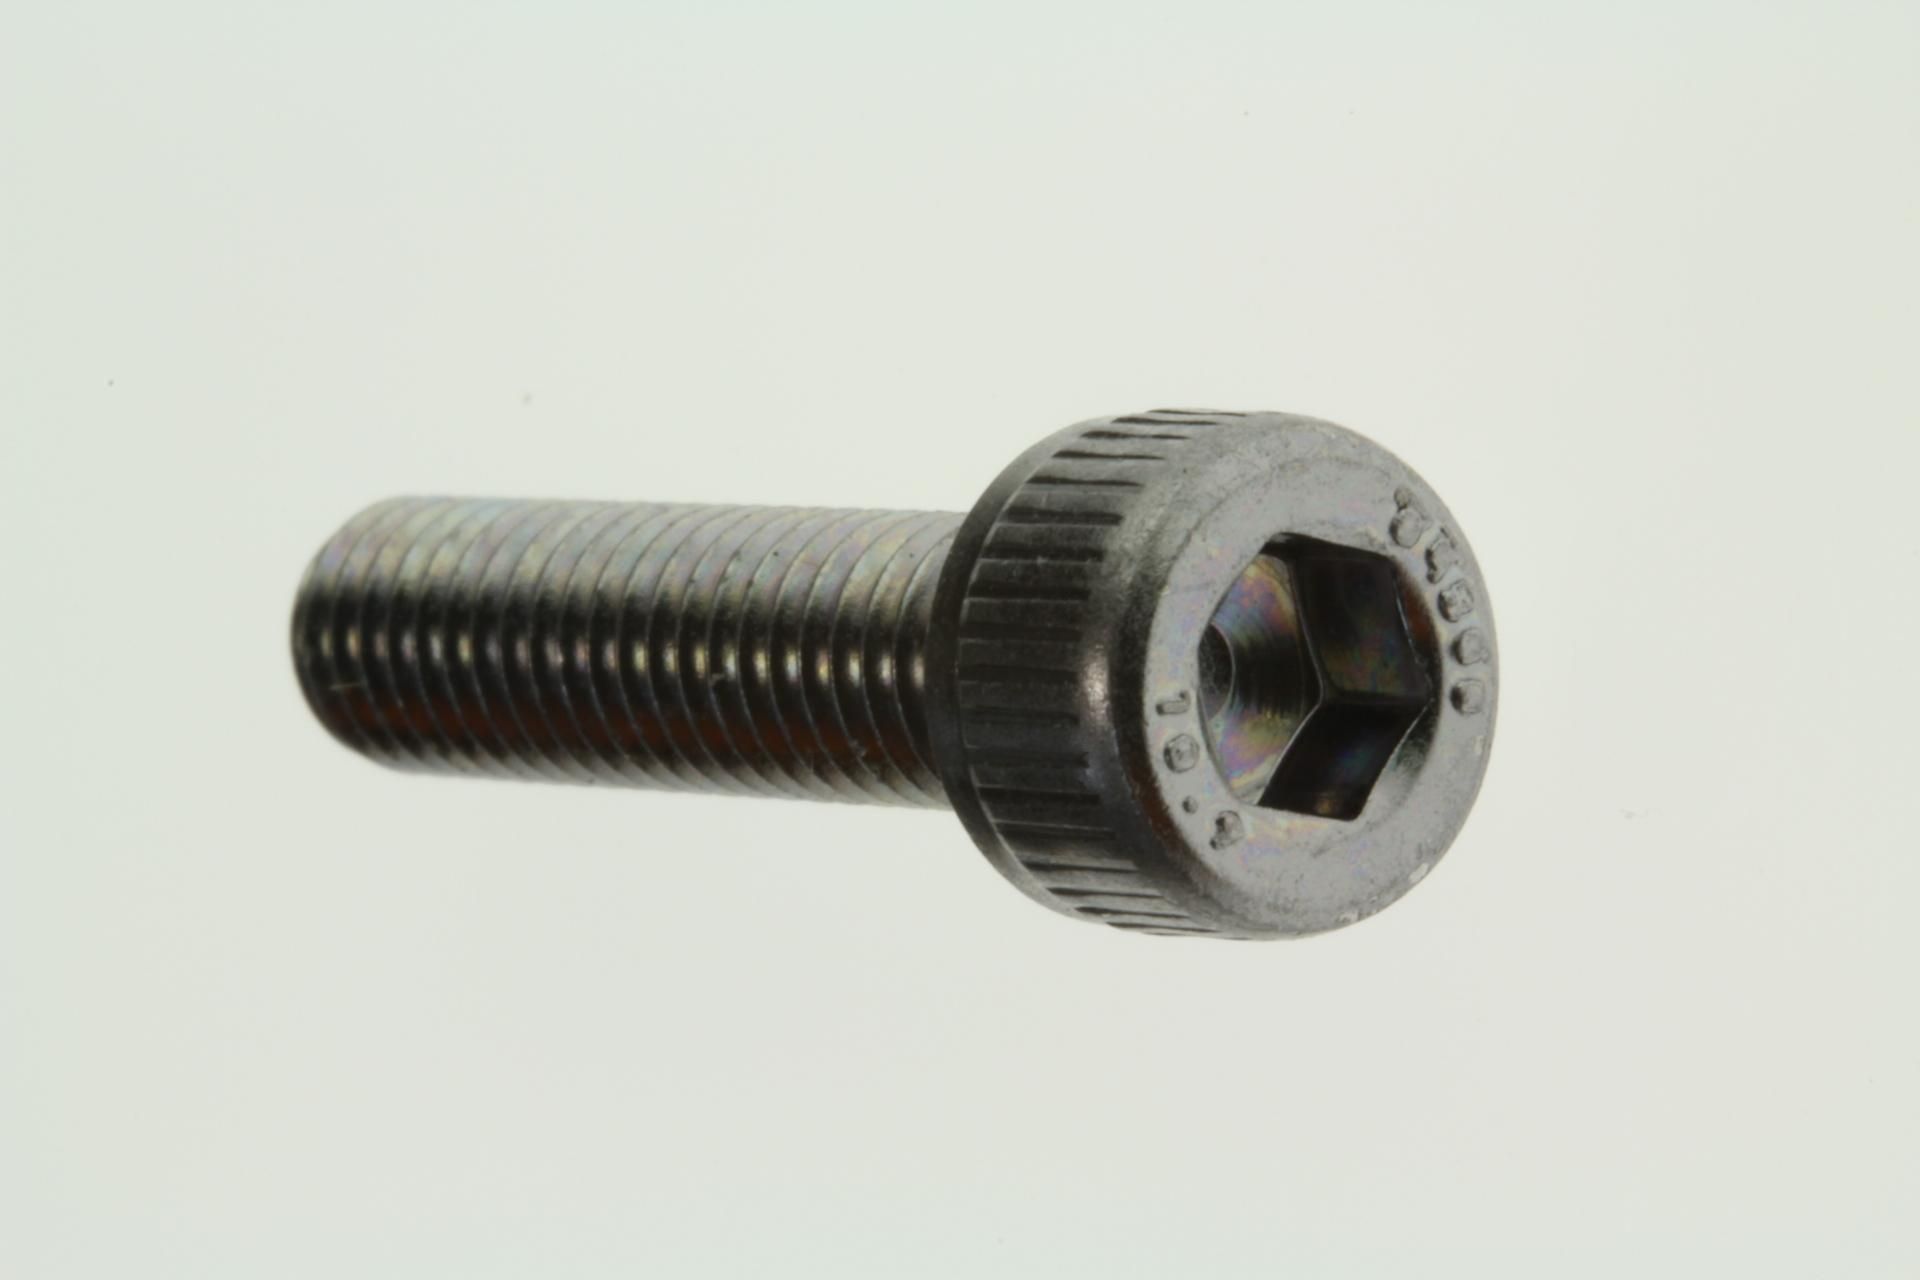 90110-06295-00 Superseded by 91314-06025-00 - BOLT (3DM)